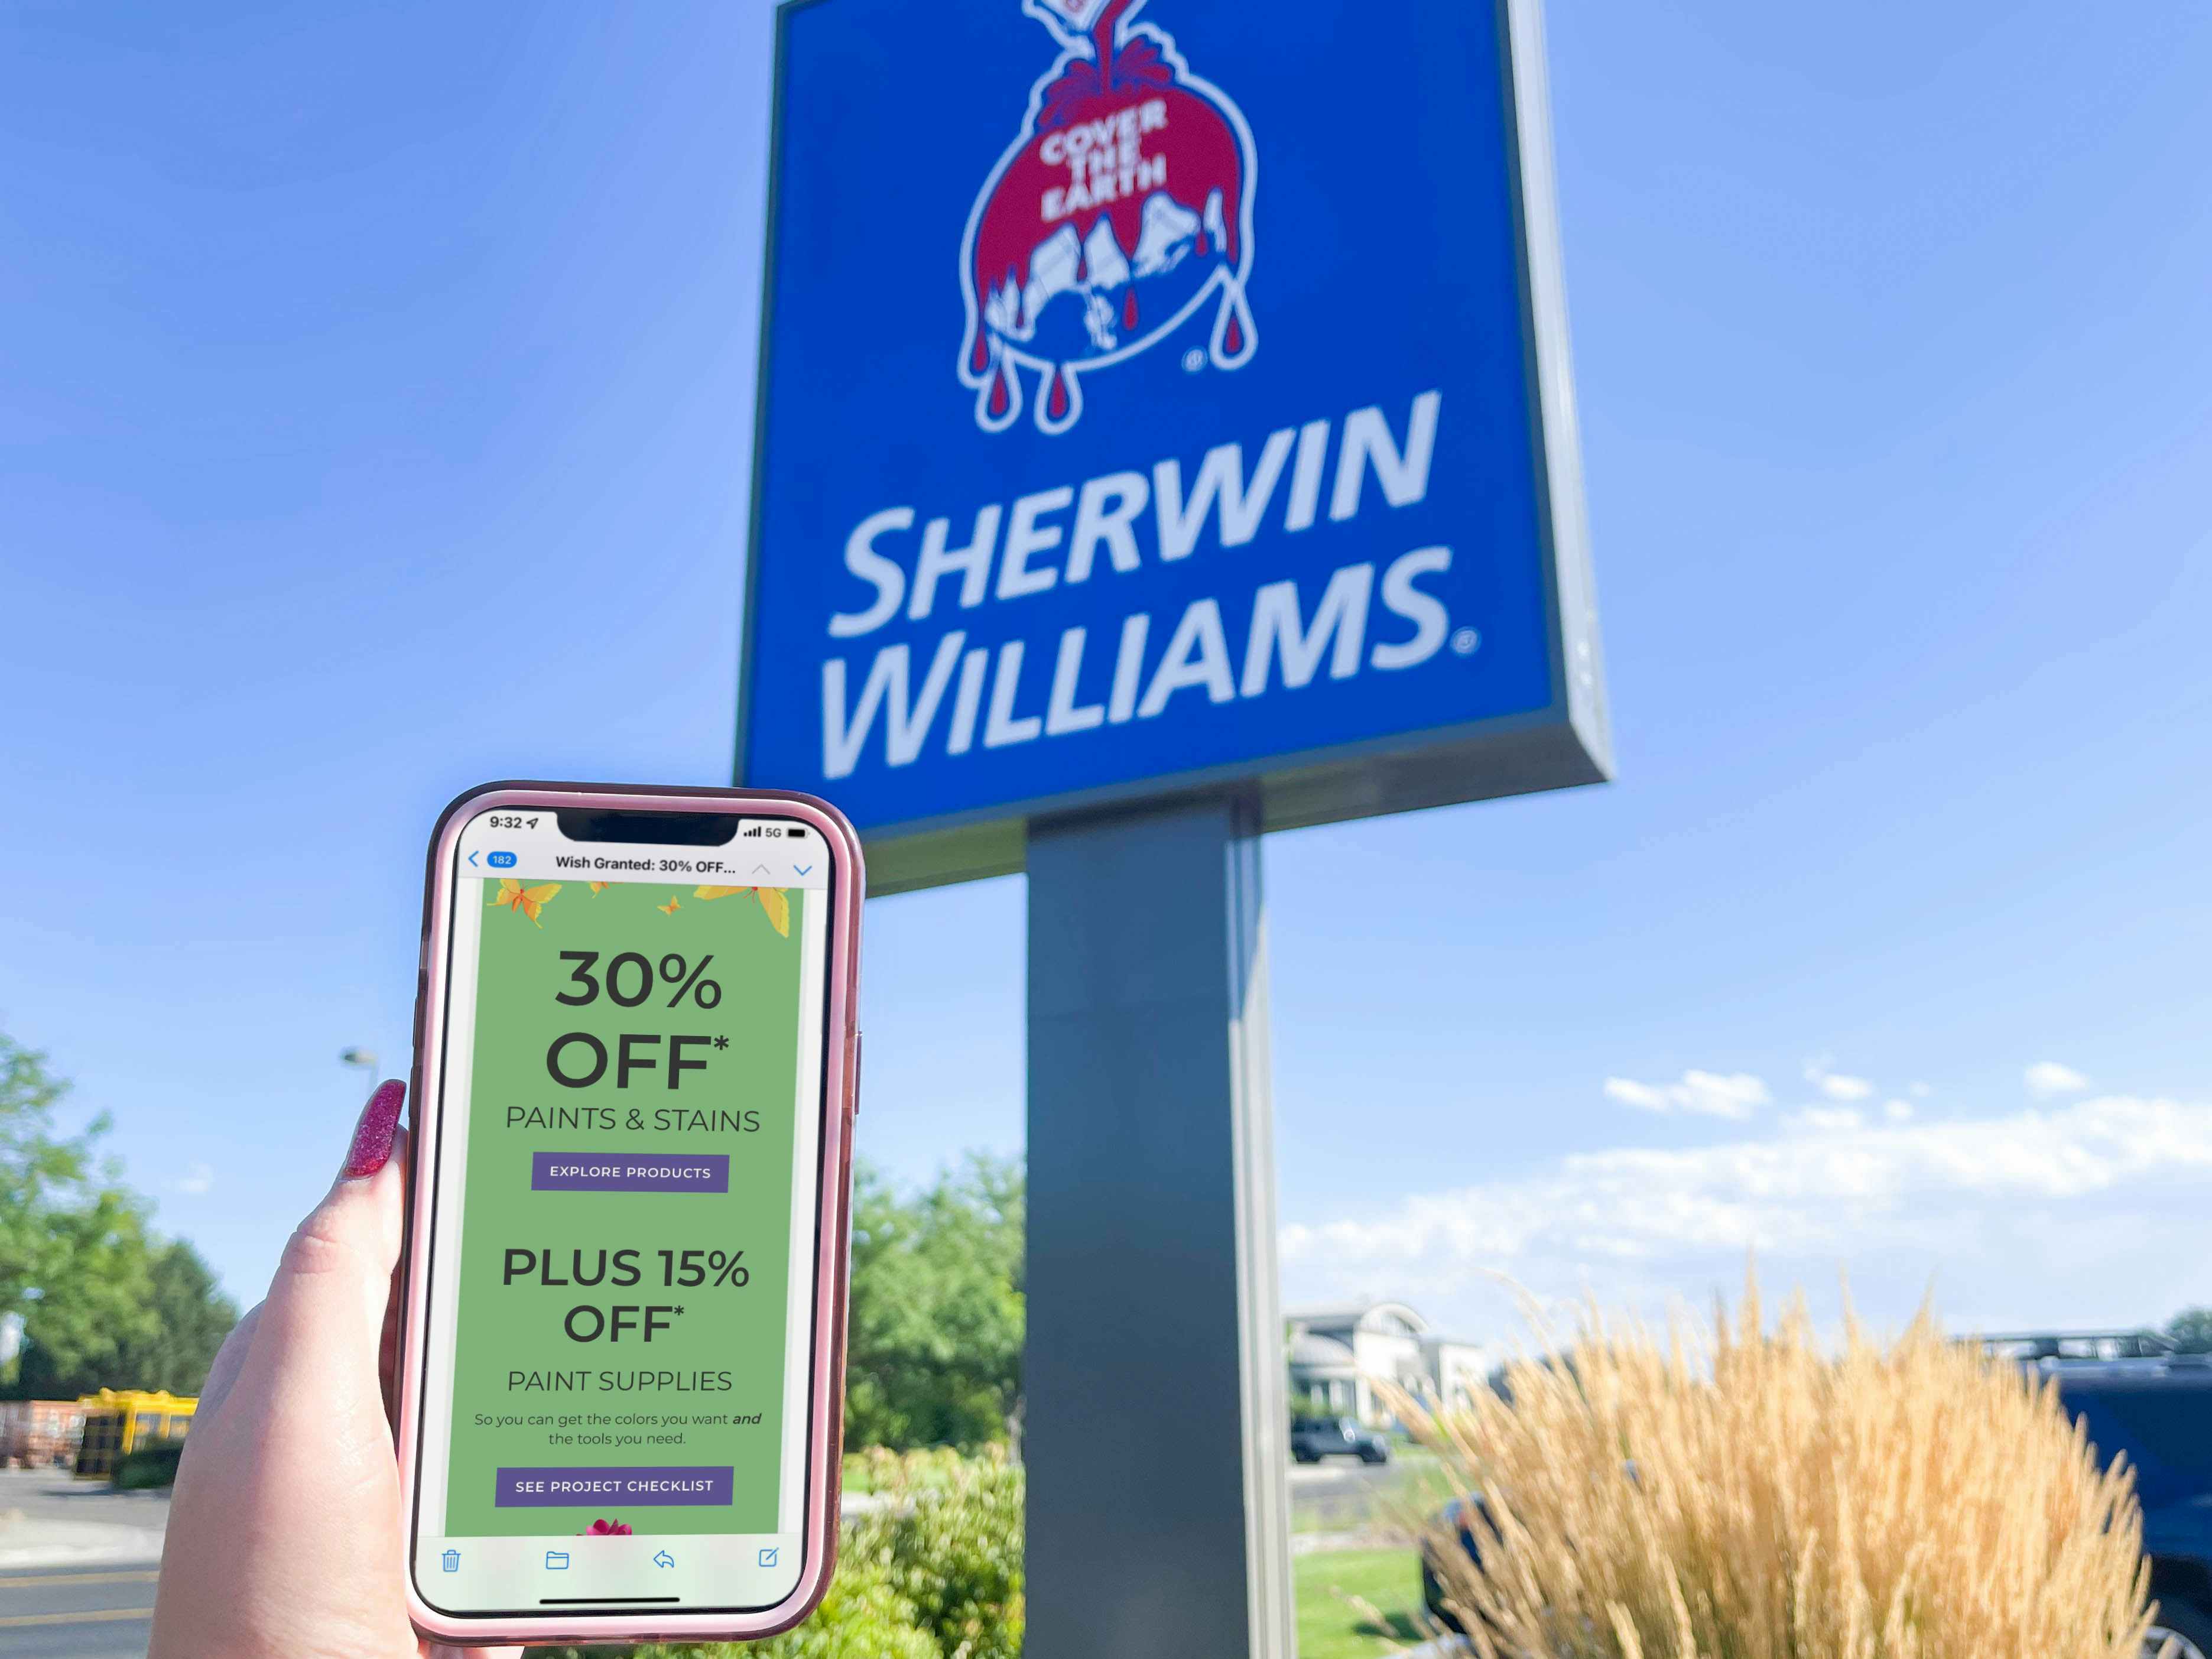 cellphone being held in front of sherwin williams store sign with email coupon on screen